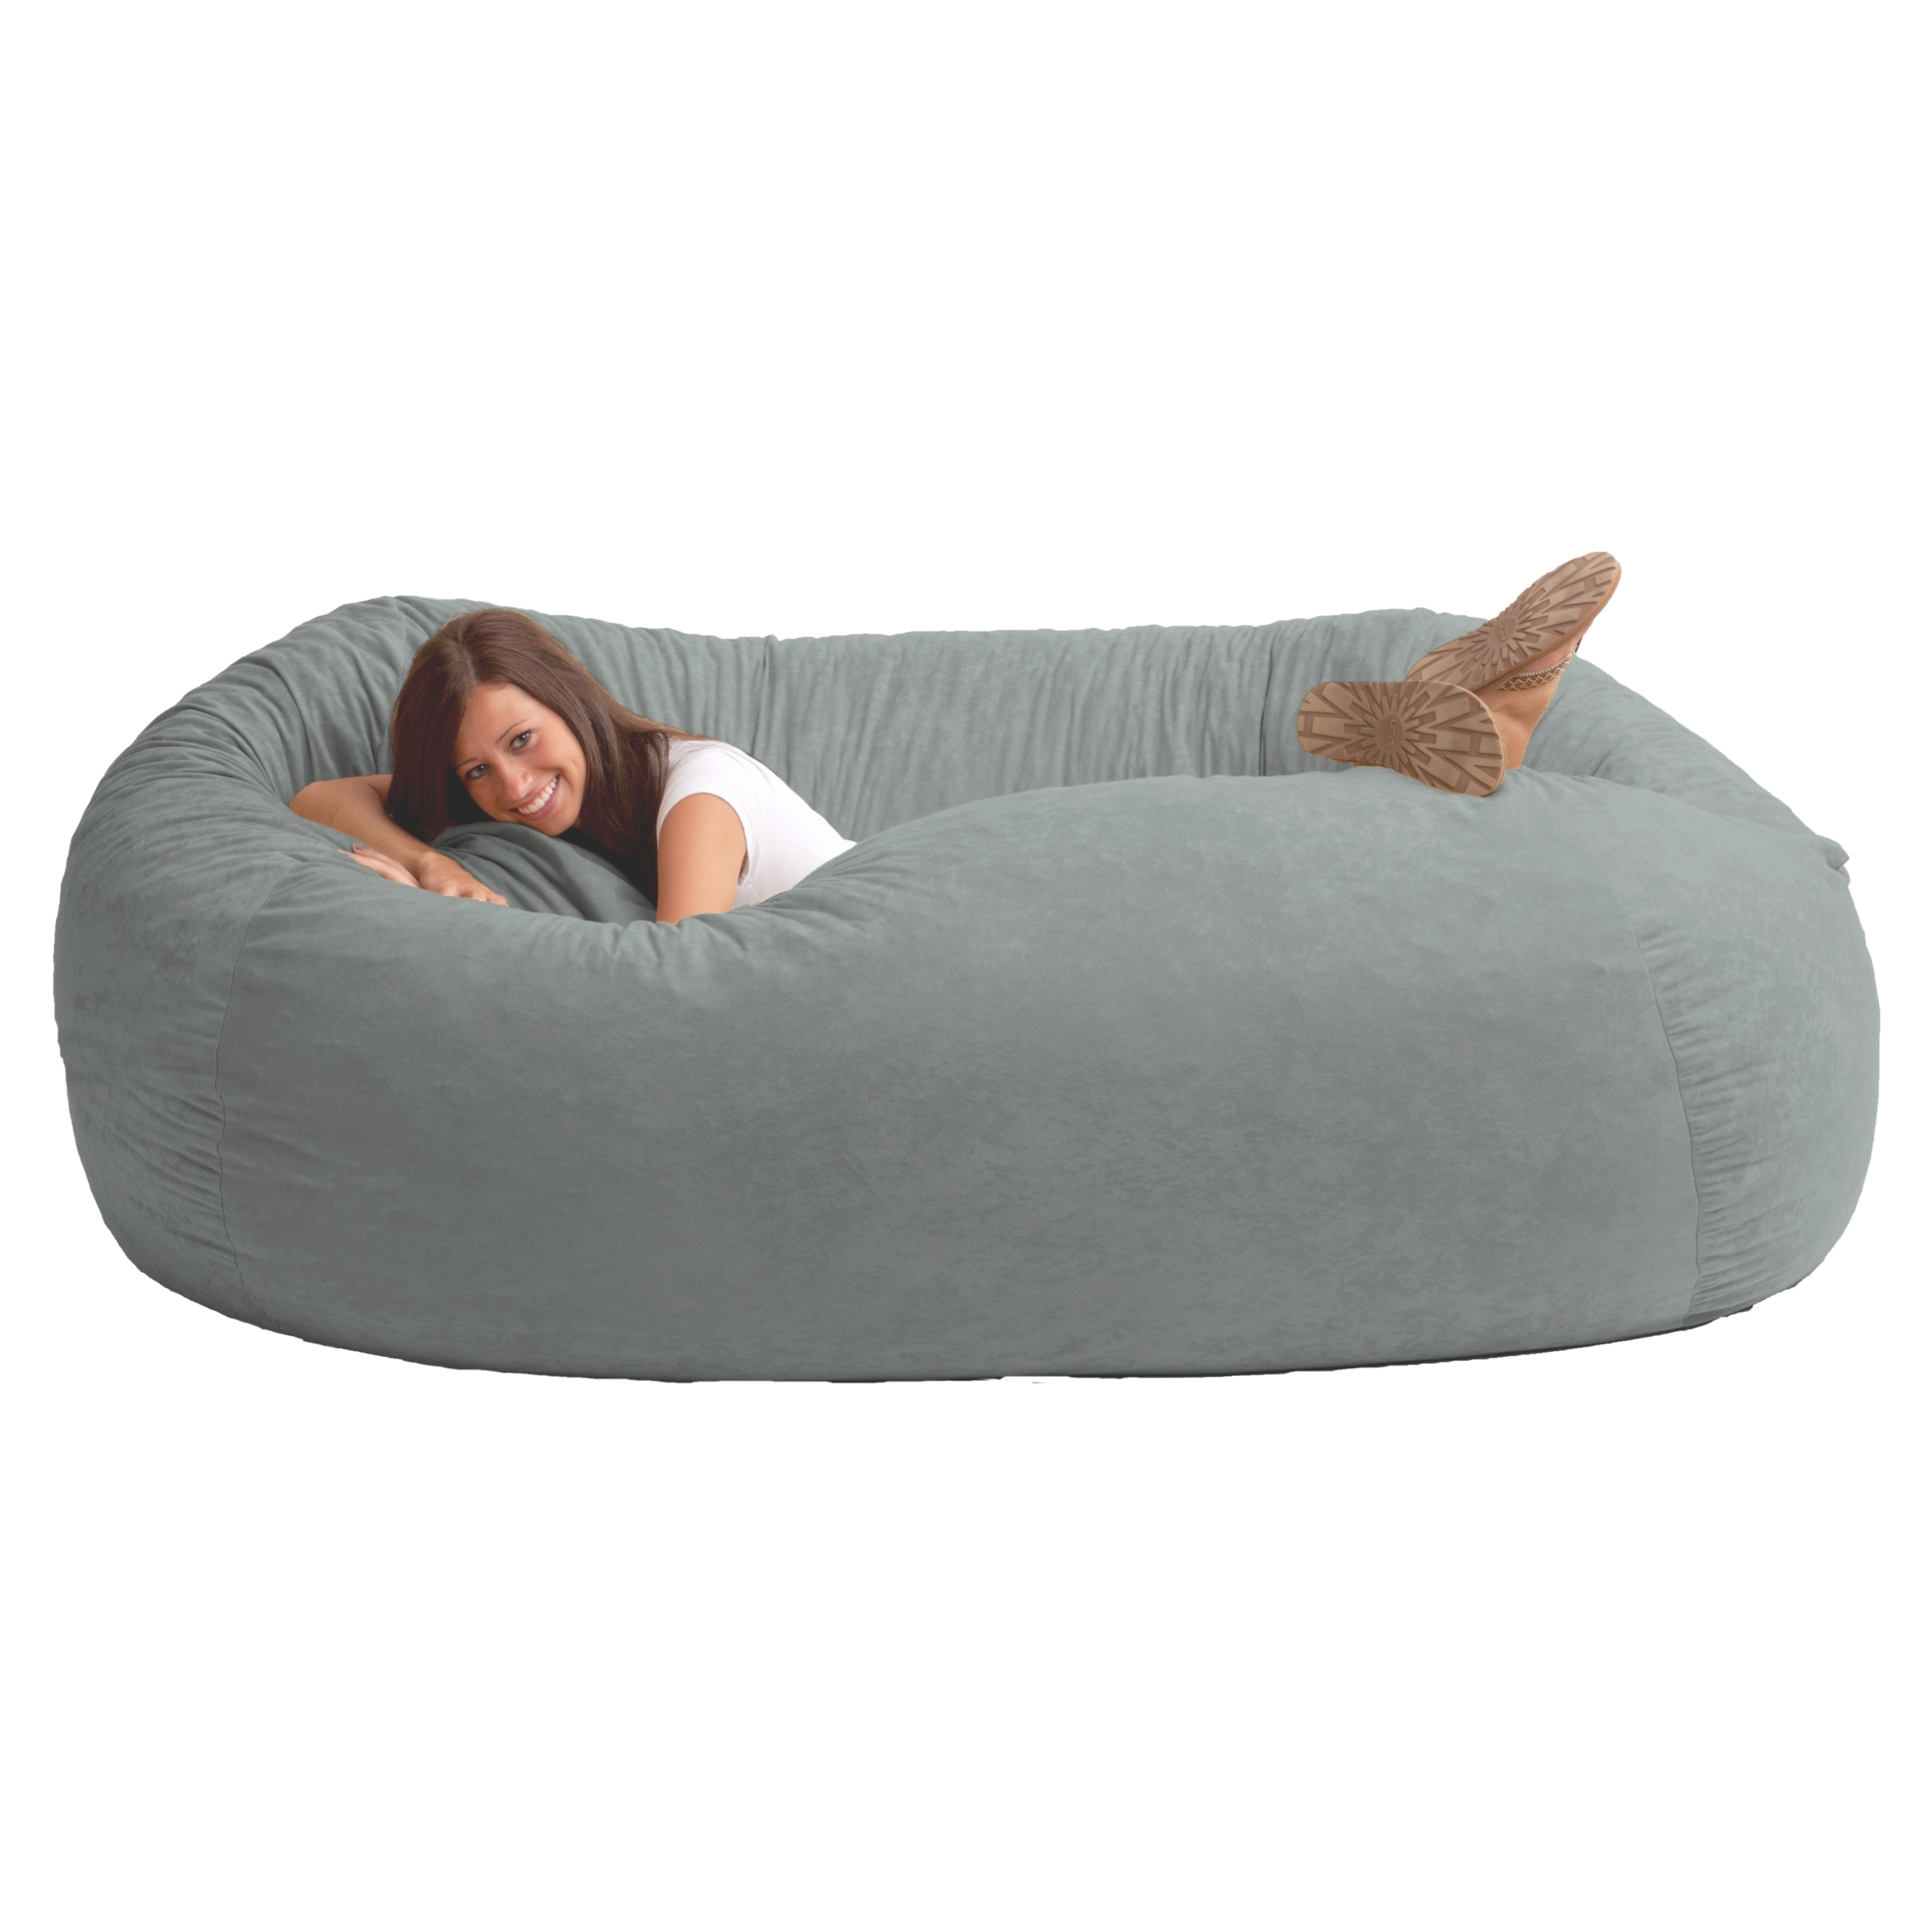 Bean Bag Chairs for Adults Sears Lovely Images Of Bean Bag Chair that Turns Into A Bed Best Home